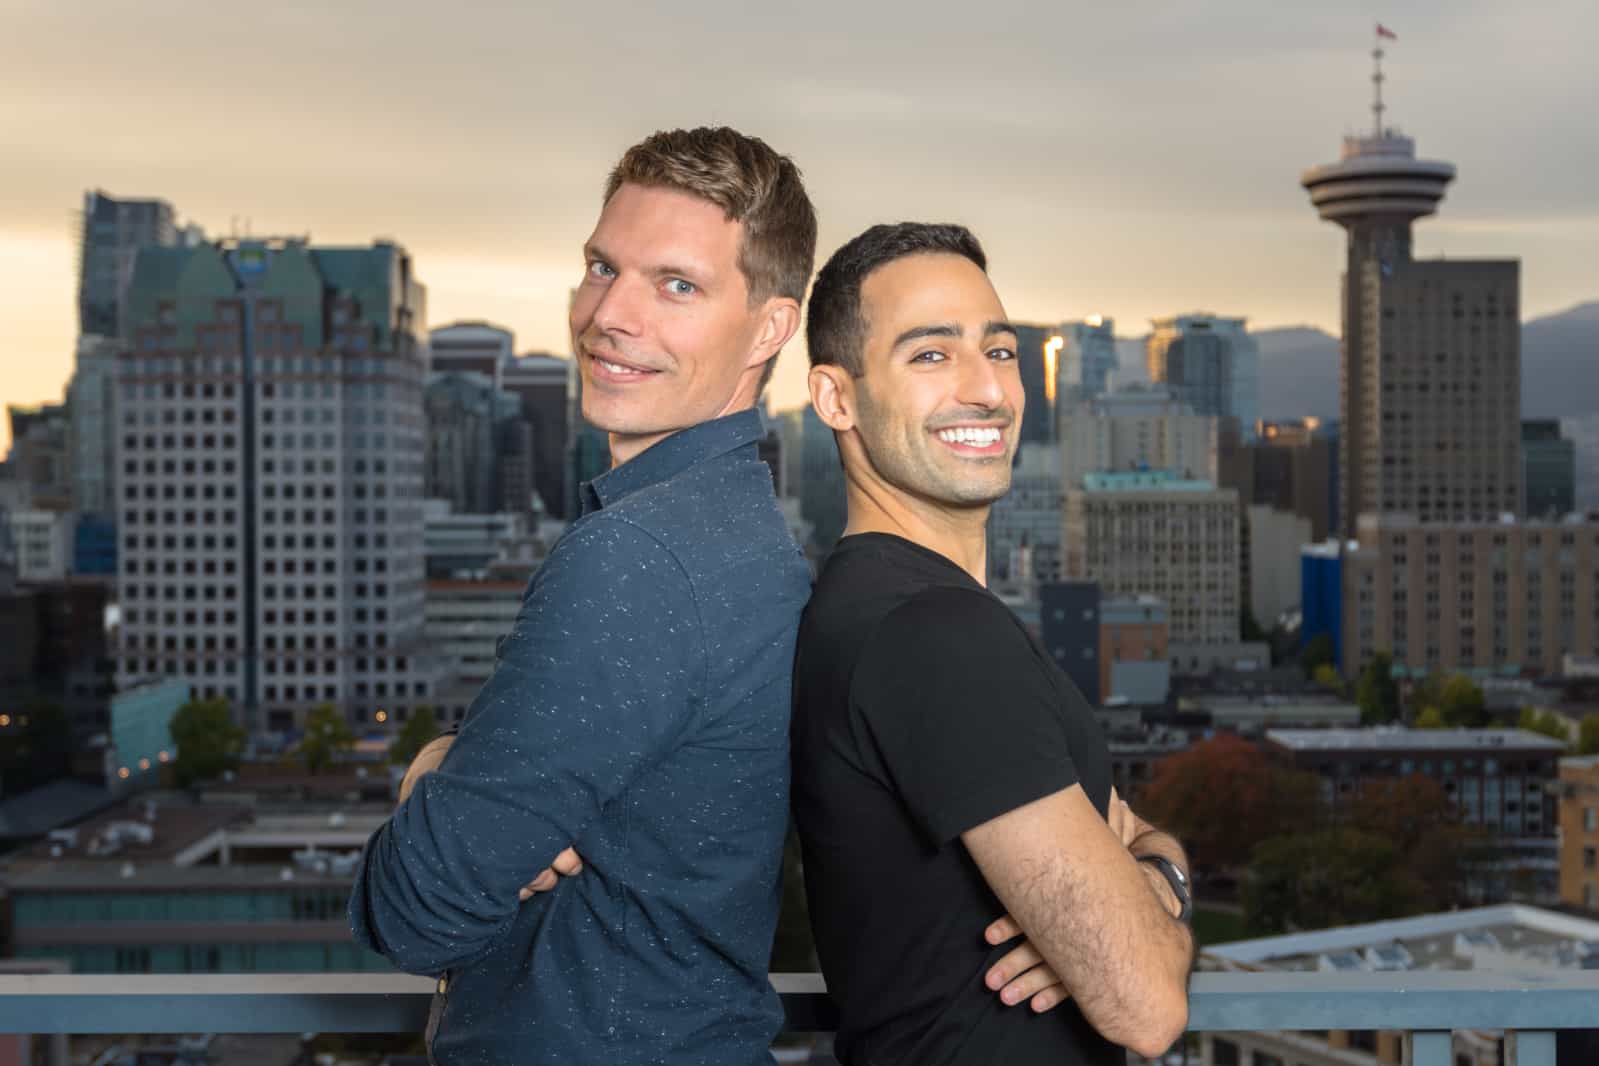 How These Vancouver Founders Built North America’s Top Platform for Sponsored Content